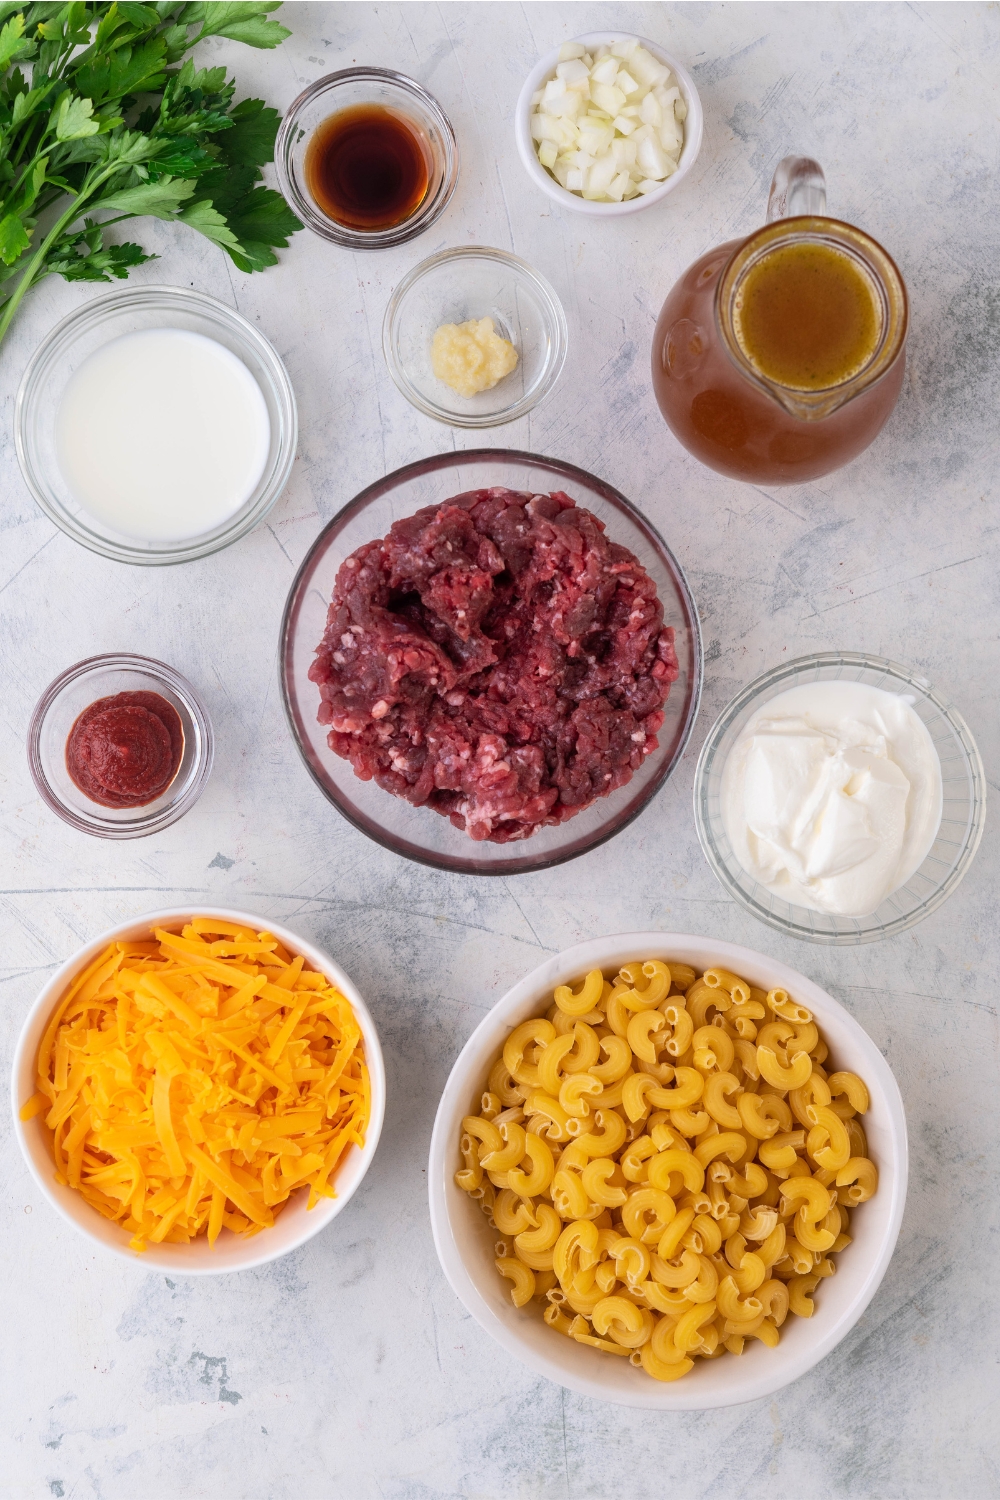 An assortment of ingredients for cheeseburger casserole including bowls of shredded cheese, uncooked elbow macaroni, raw ground beef, beef broth, sour cream, seasonings, diced onion, and tomato paste.